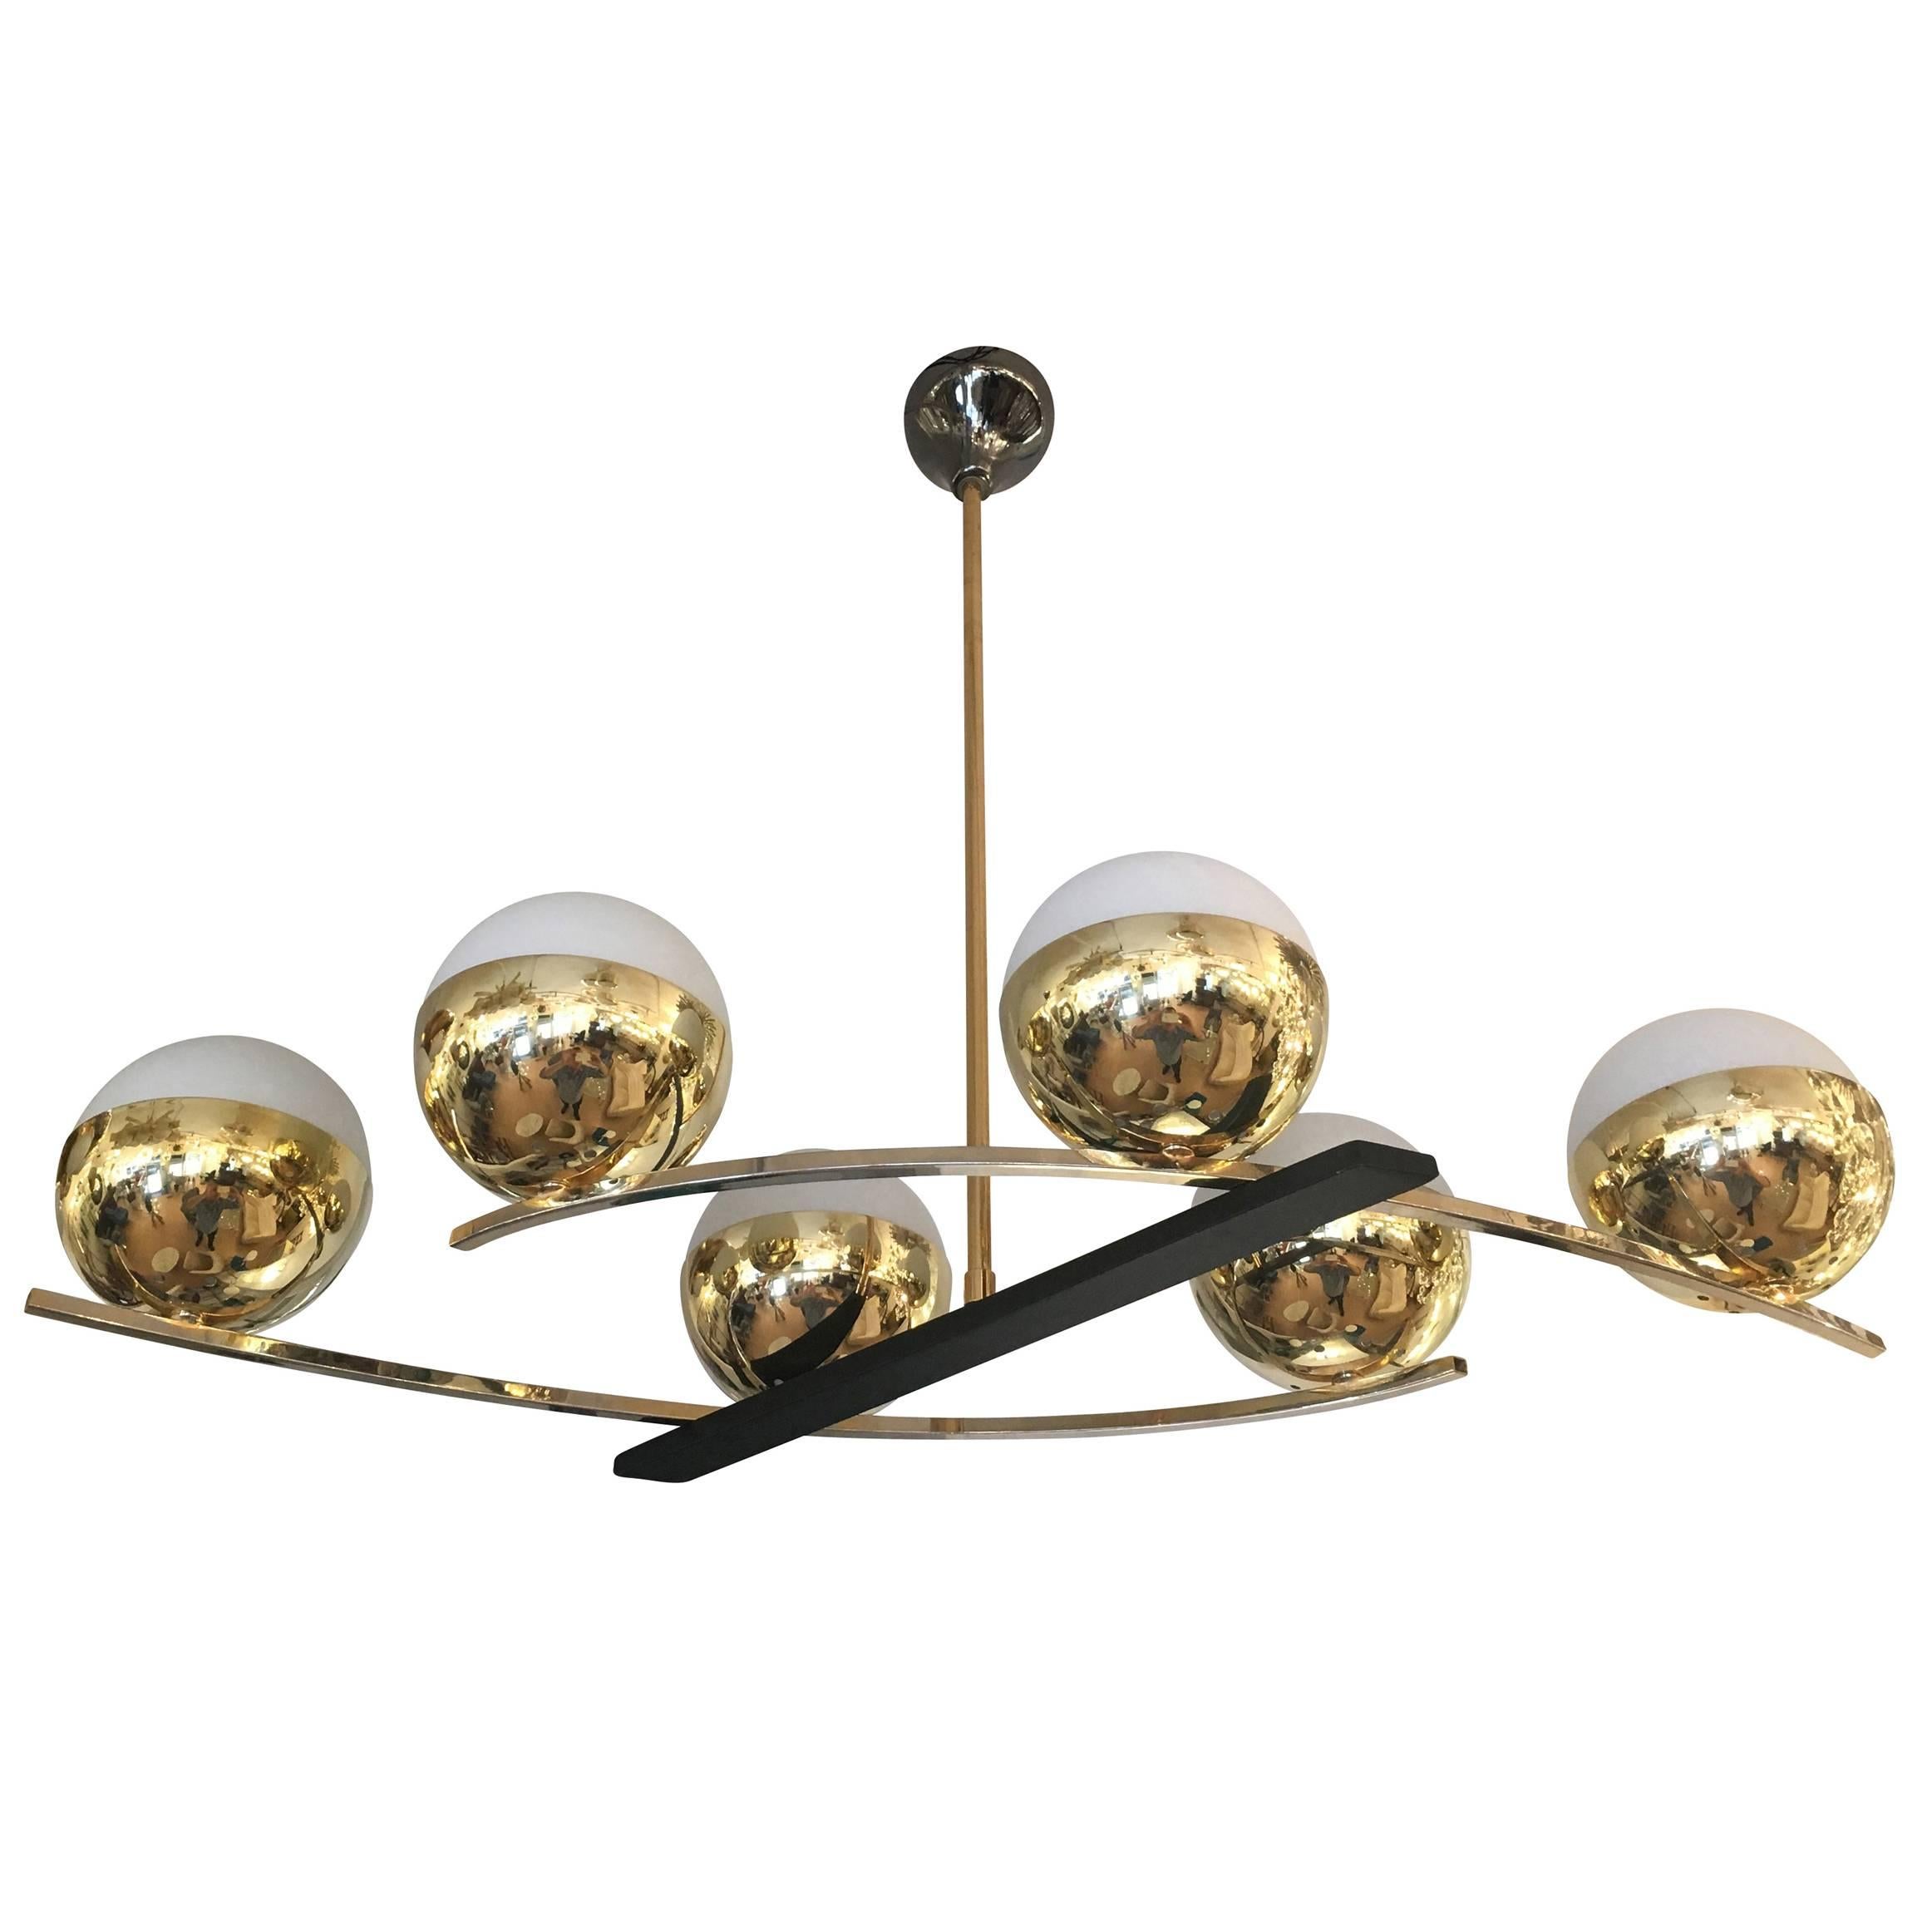 Elegant French Mid-Century Chandelier with Six Globes